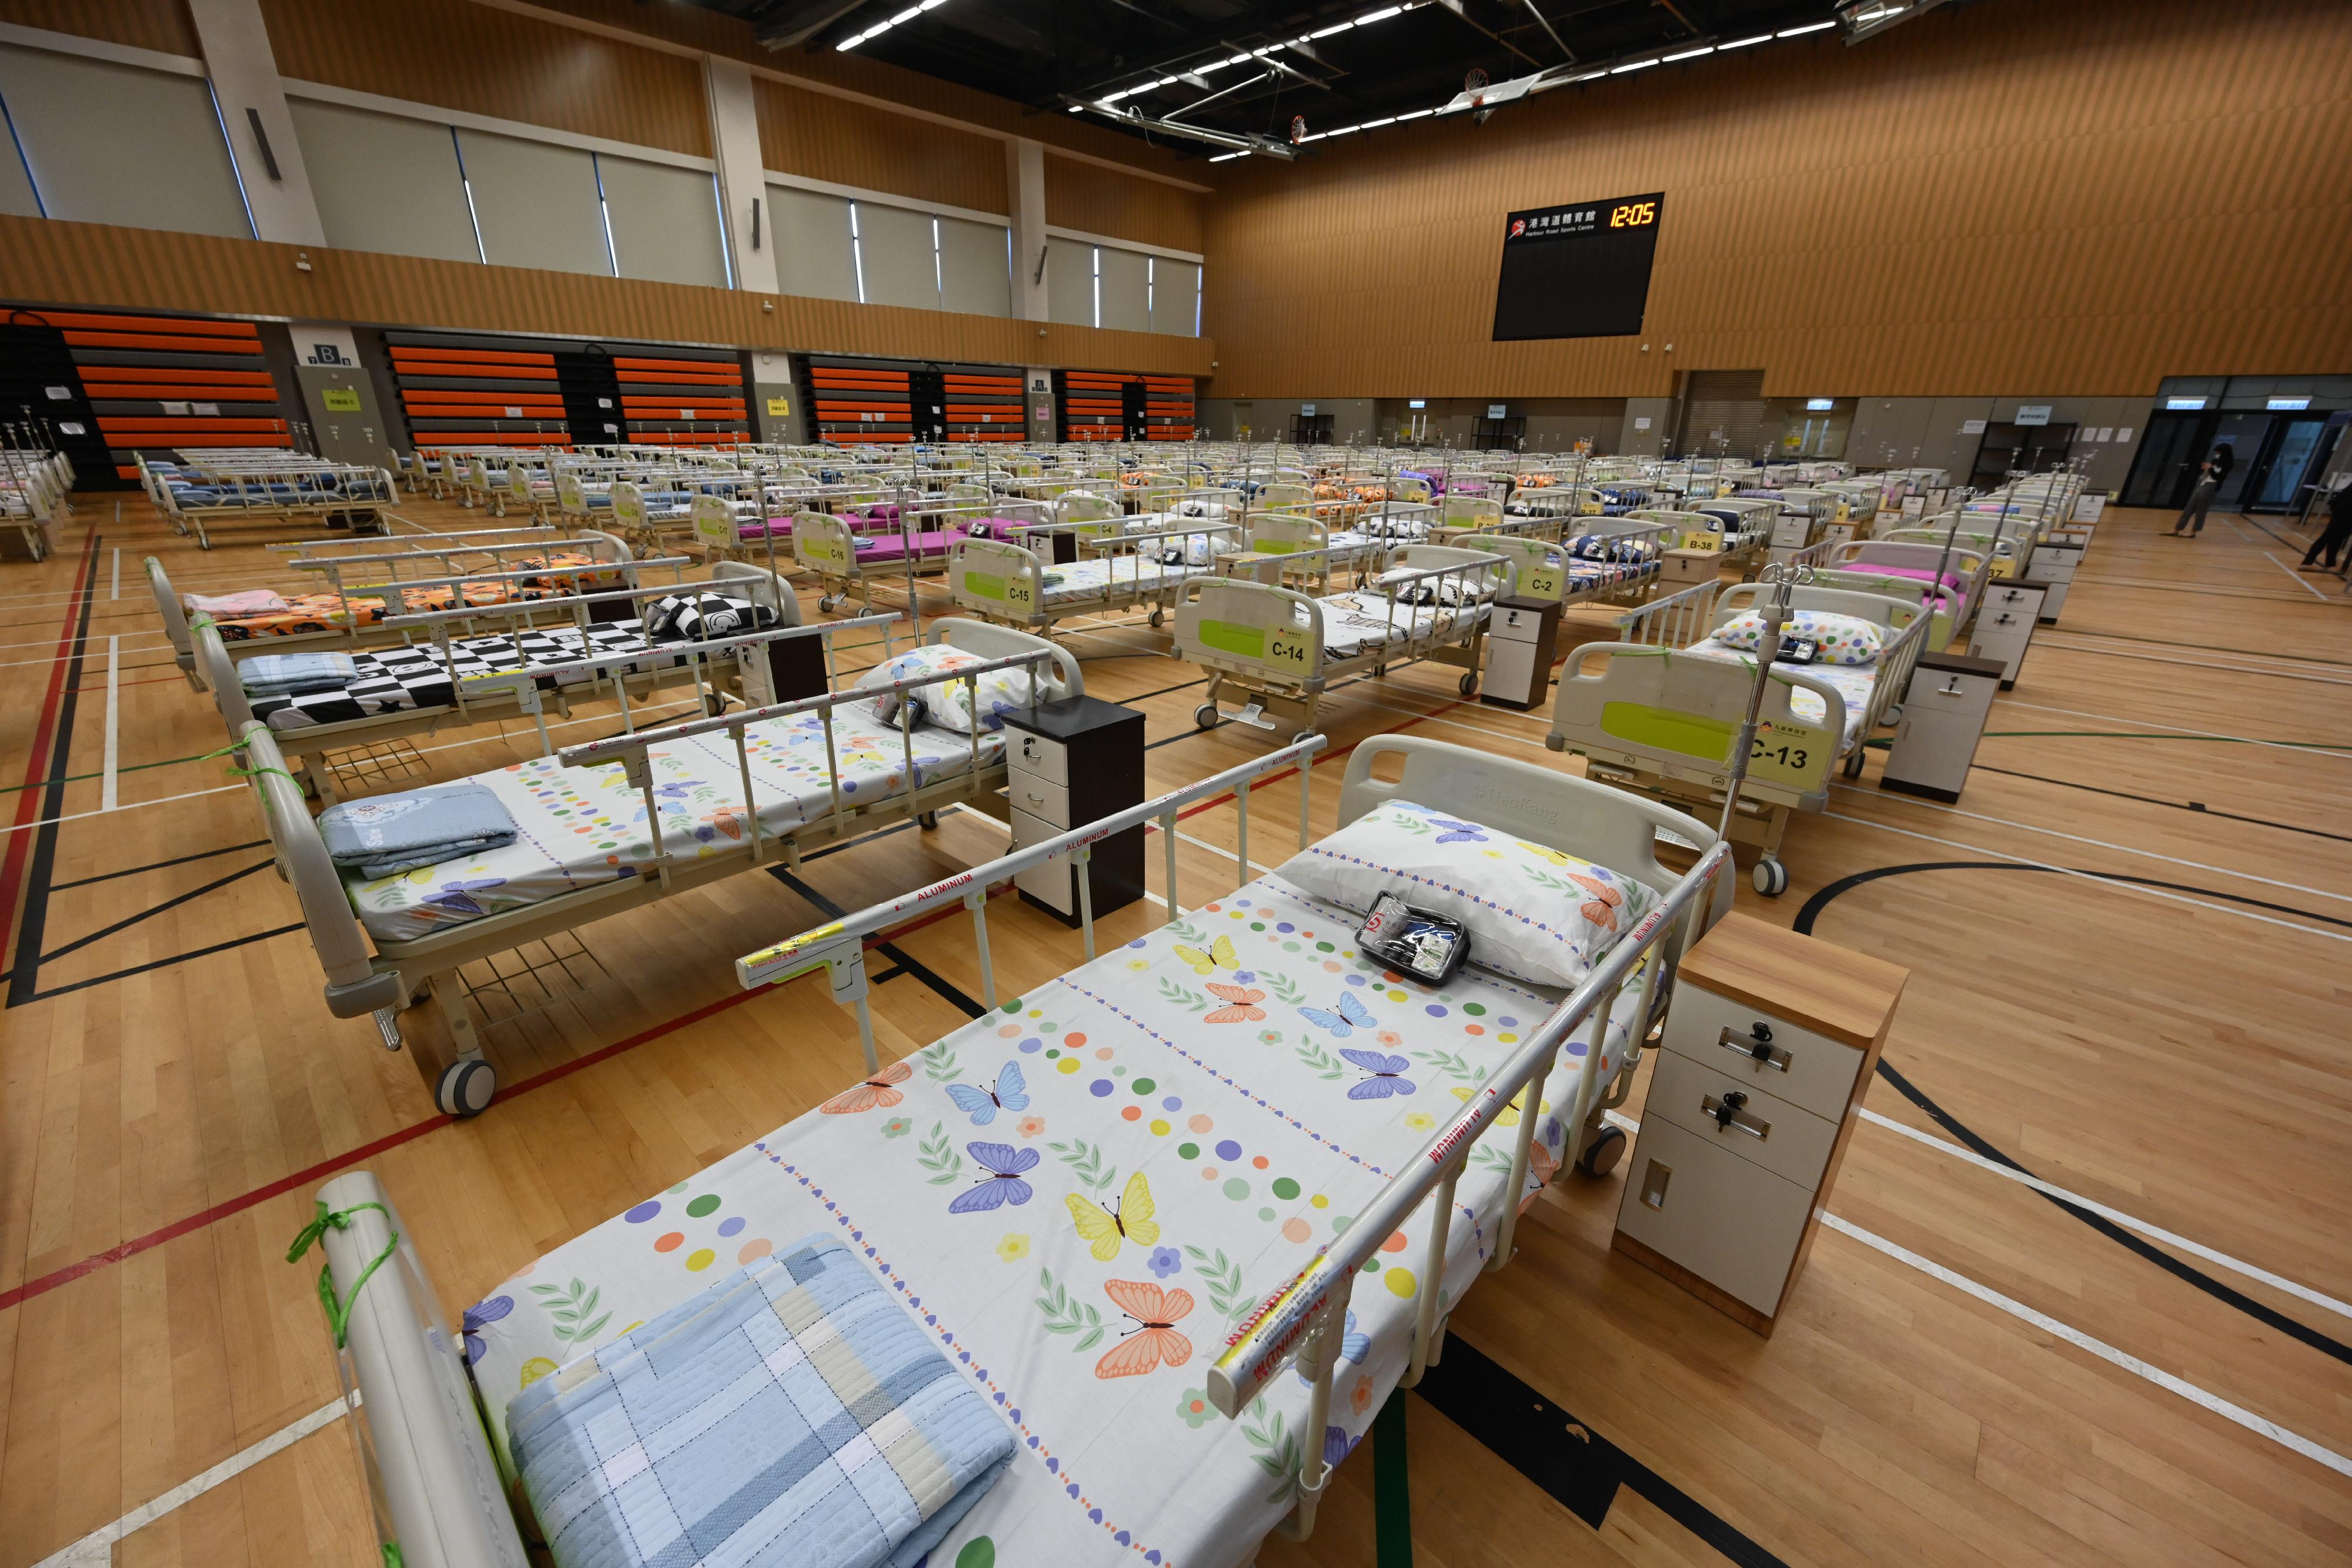 The Secretary for Labour and Welfare, Dr Law Chi-kwong, today (March 14) conveyed his appreciation to China Resources Charity Foundation for its donation of 1 000 hospital beds to the Social Welfare Department and assistance to the Government to set up isolation and holding centres in various sports centres. Photo shows newly installed beds in Harbour Road Sports Centre in Wan Chai.